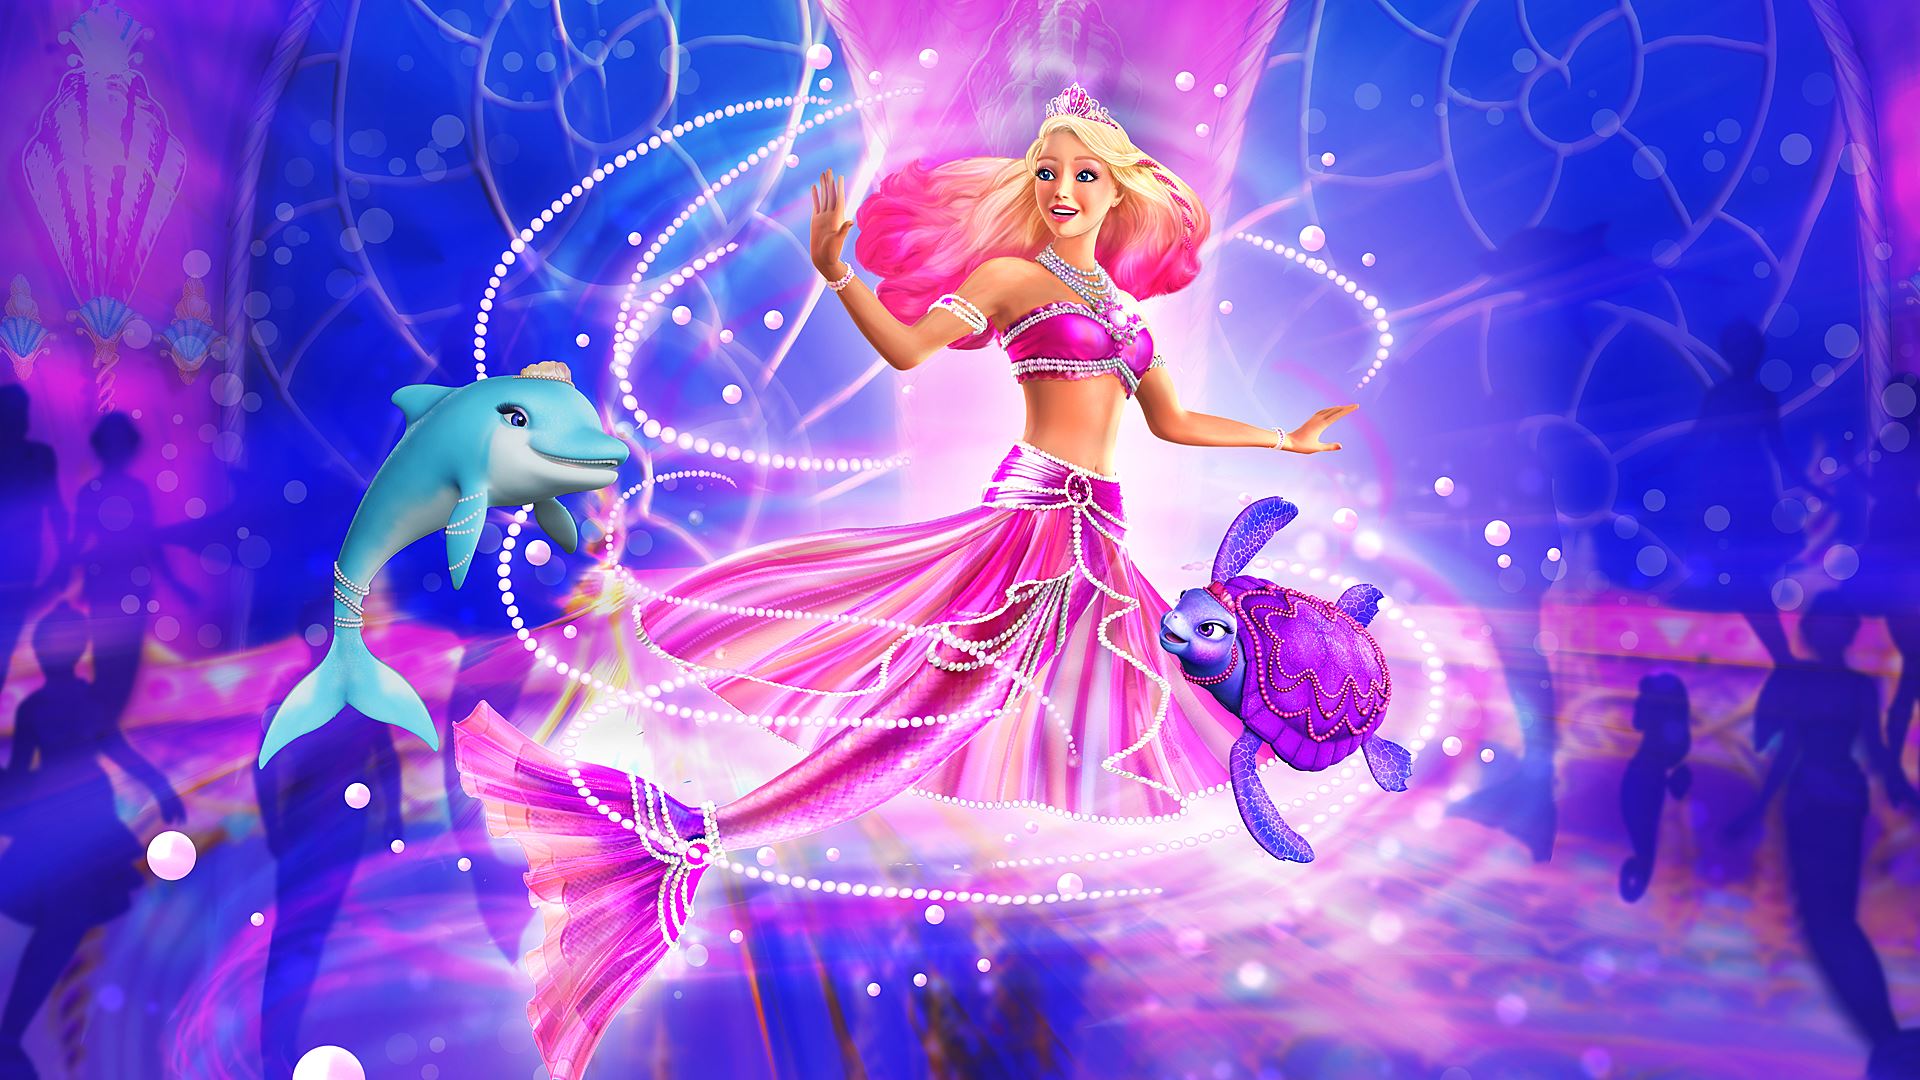 Barbie The Pearl Princess Wallpaper   Barbies Animated Films 1920x1080